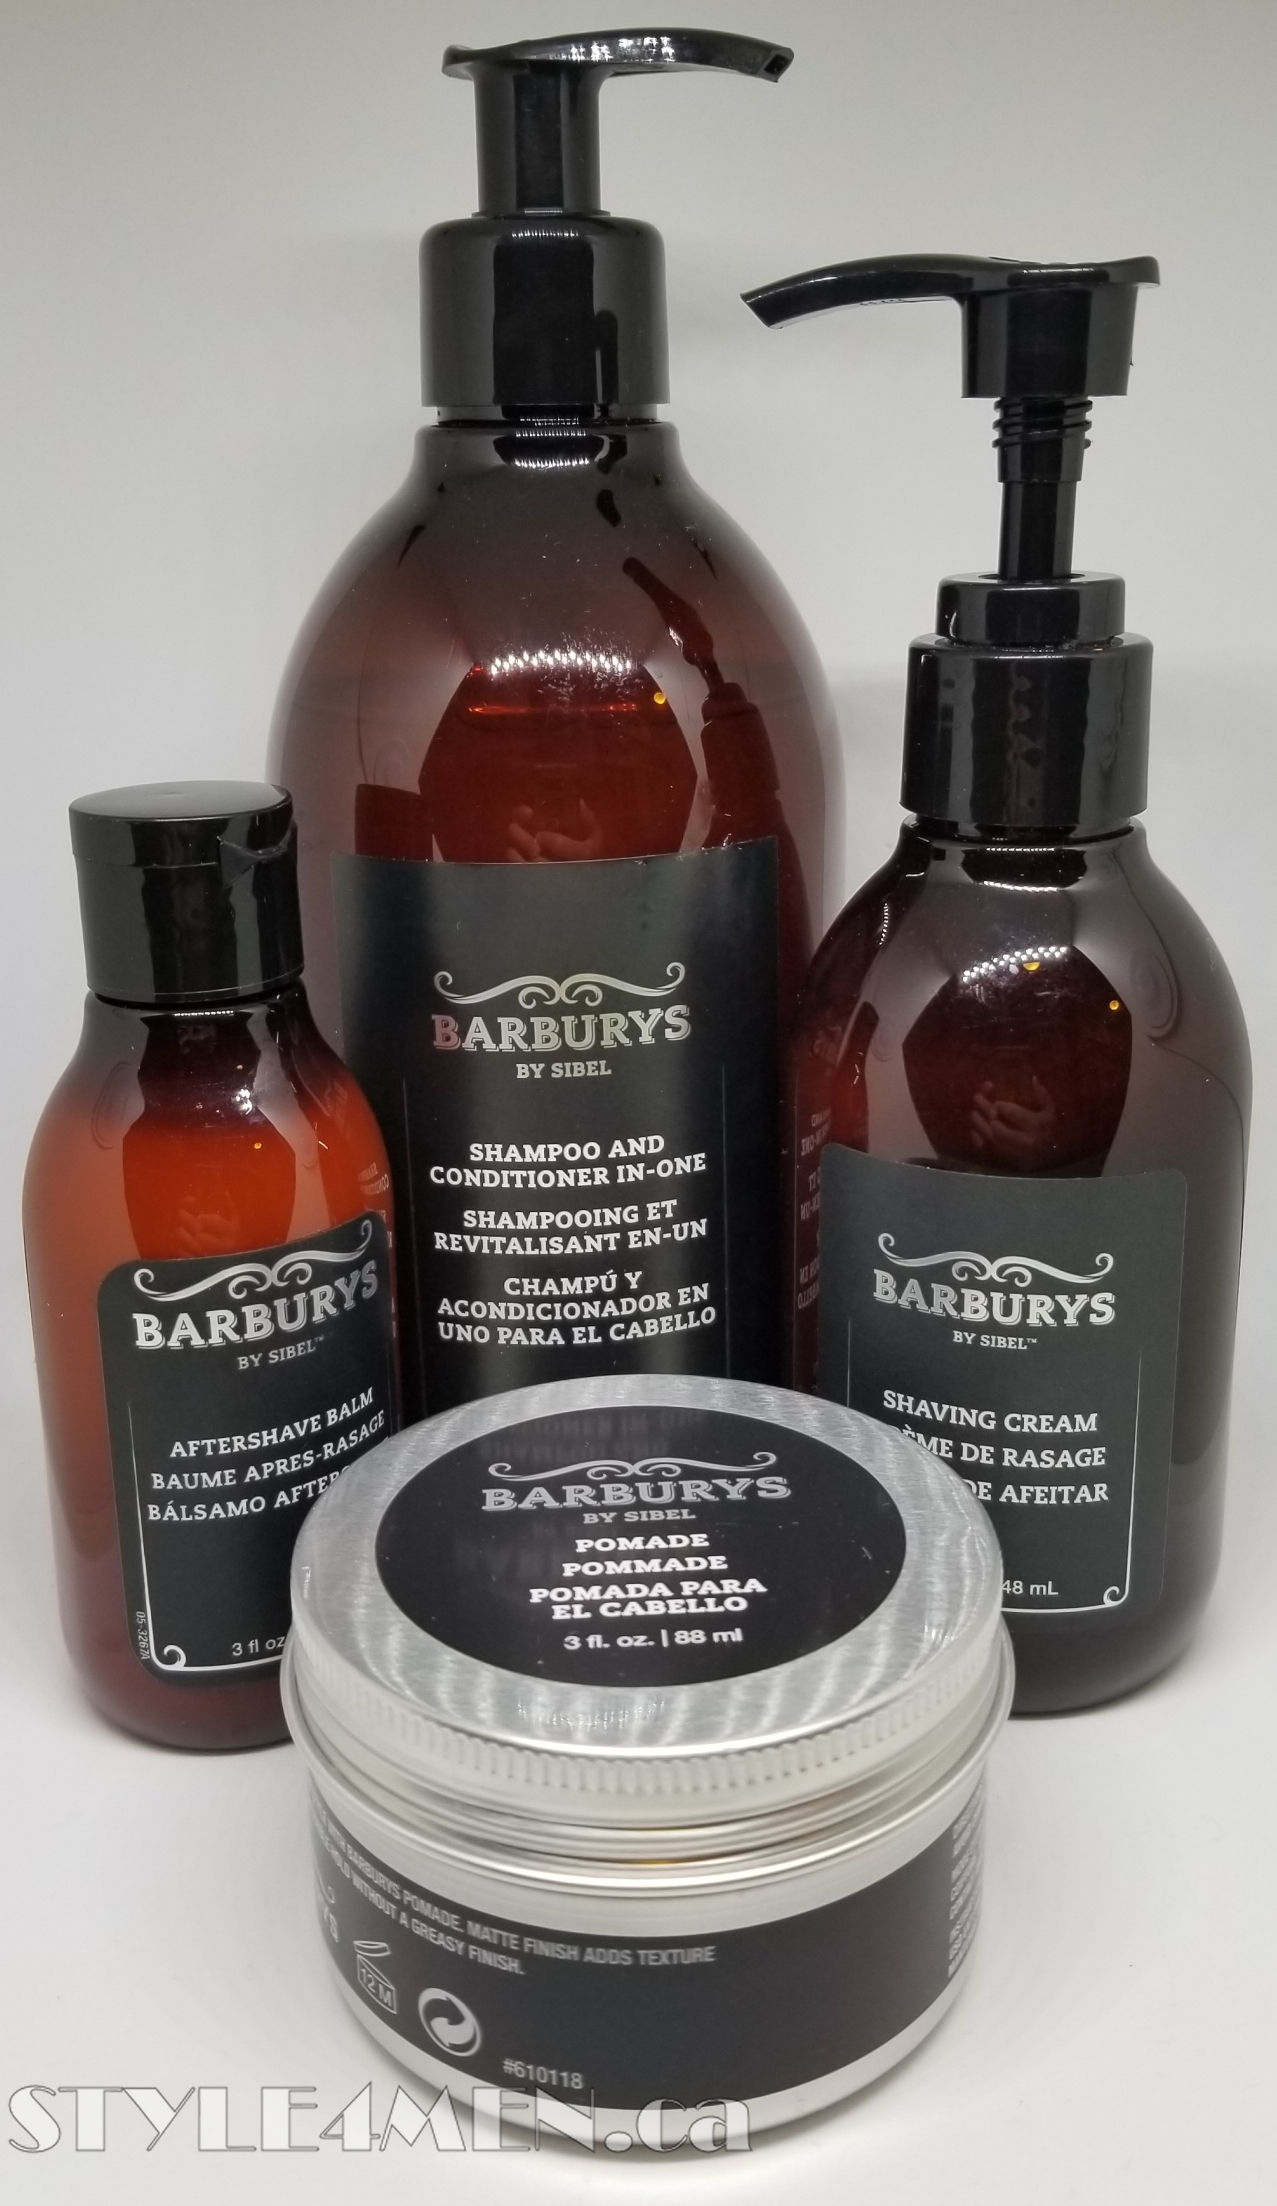 Barburys Shave Cream and Aftershave Balm